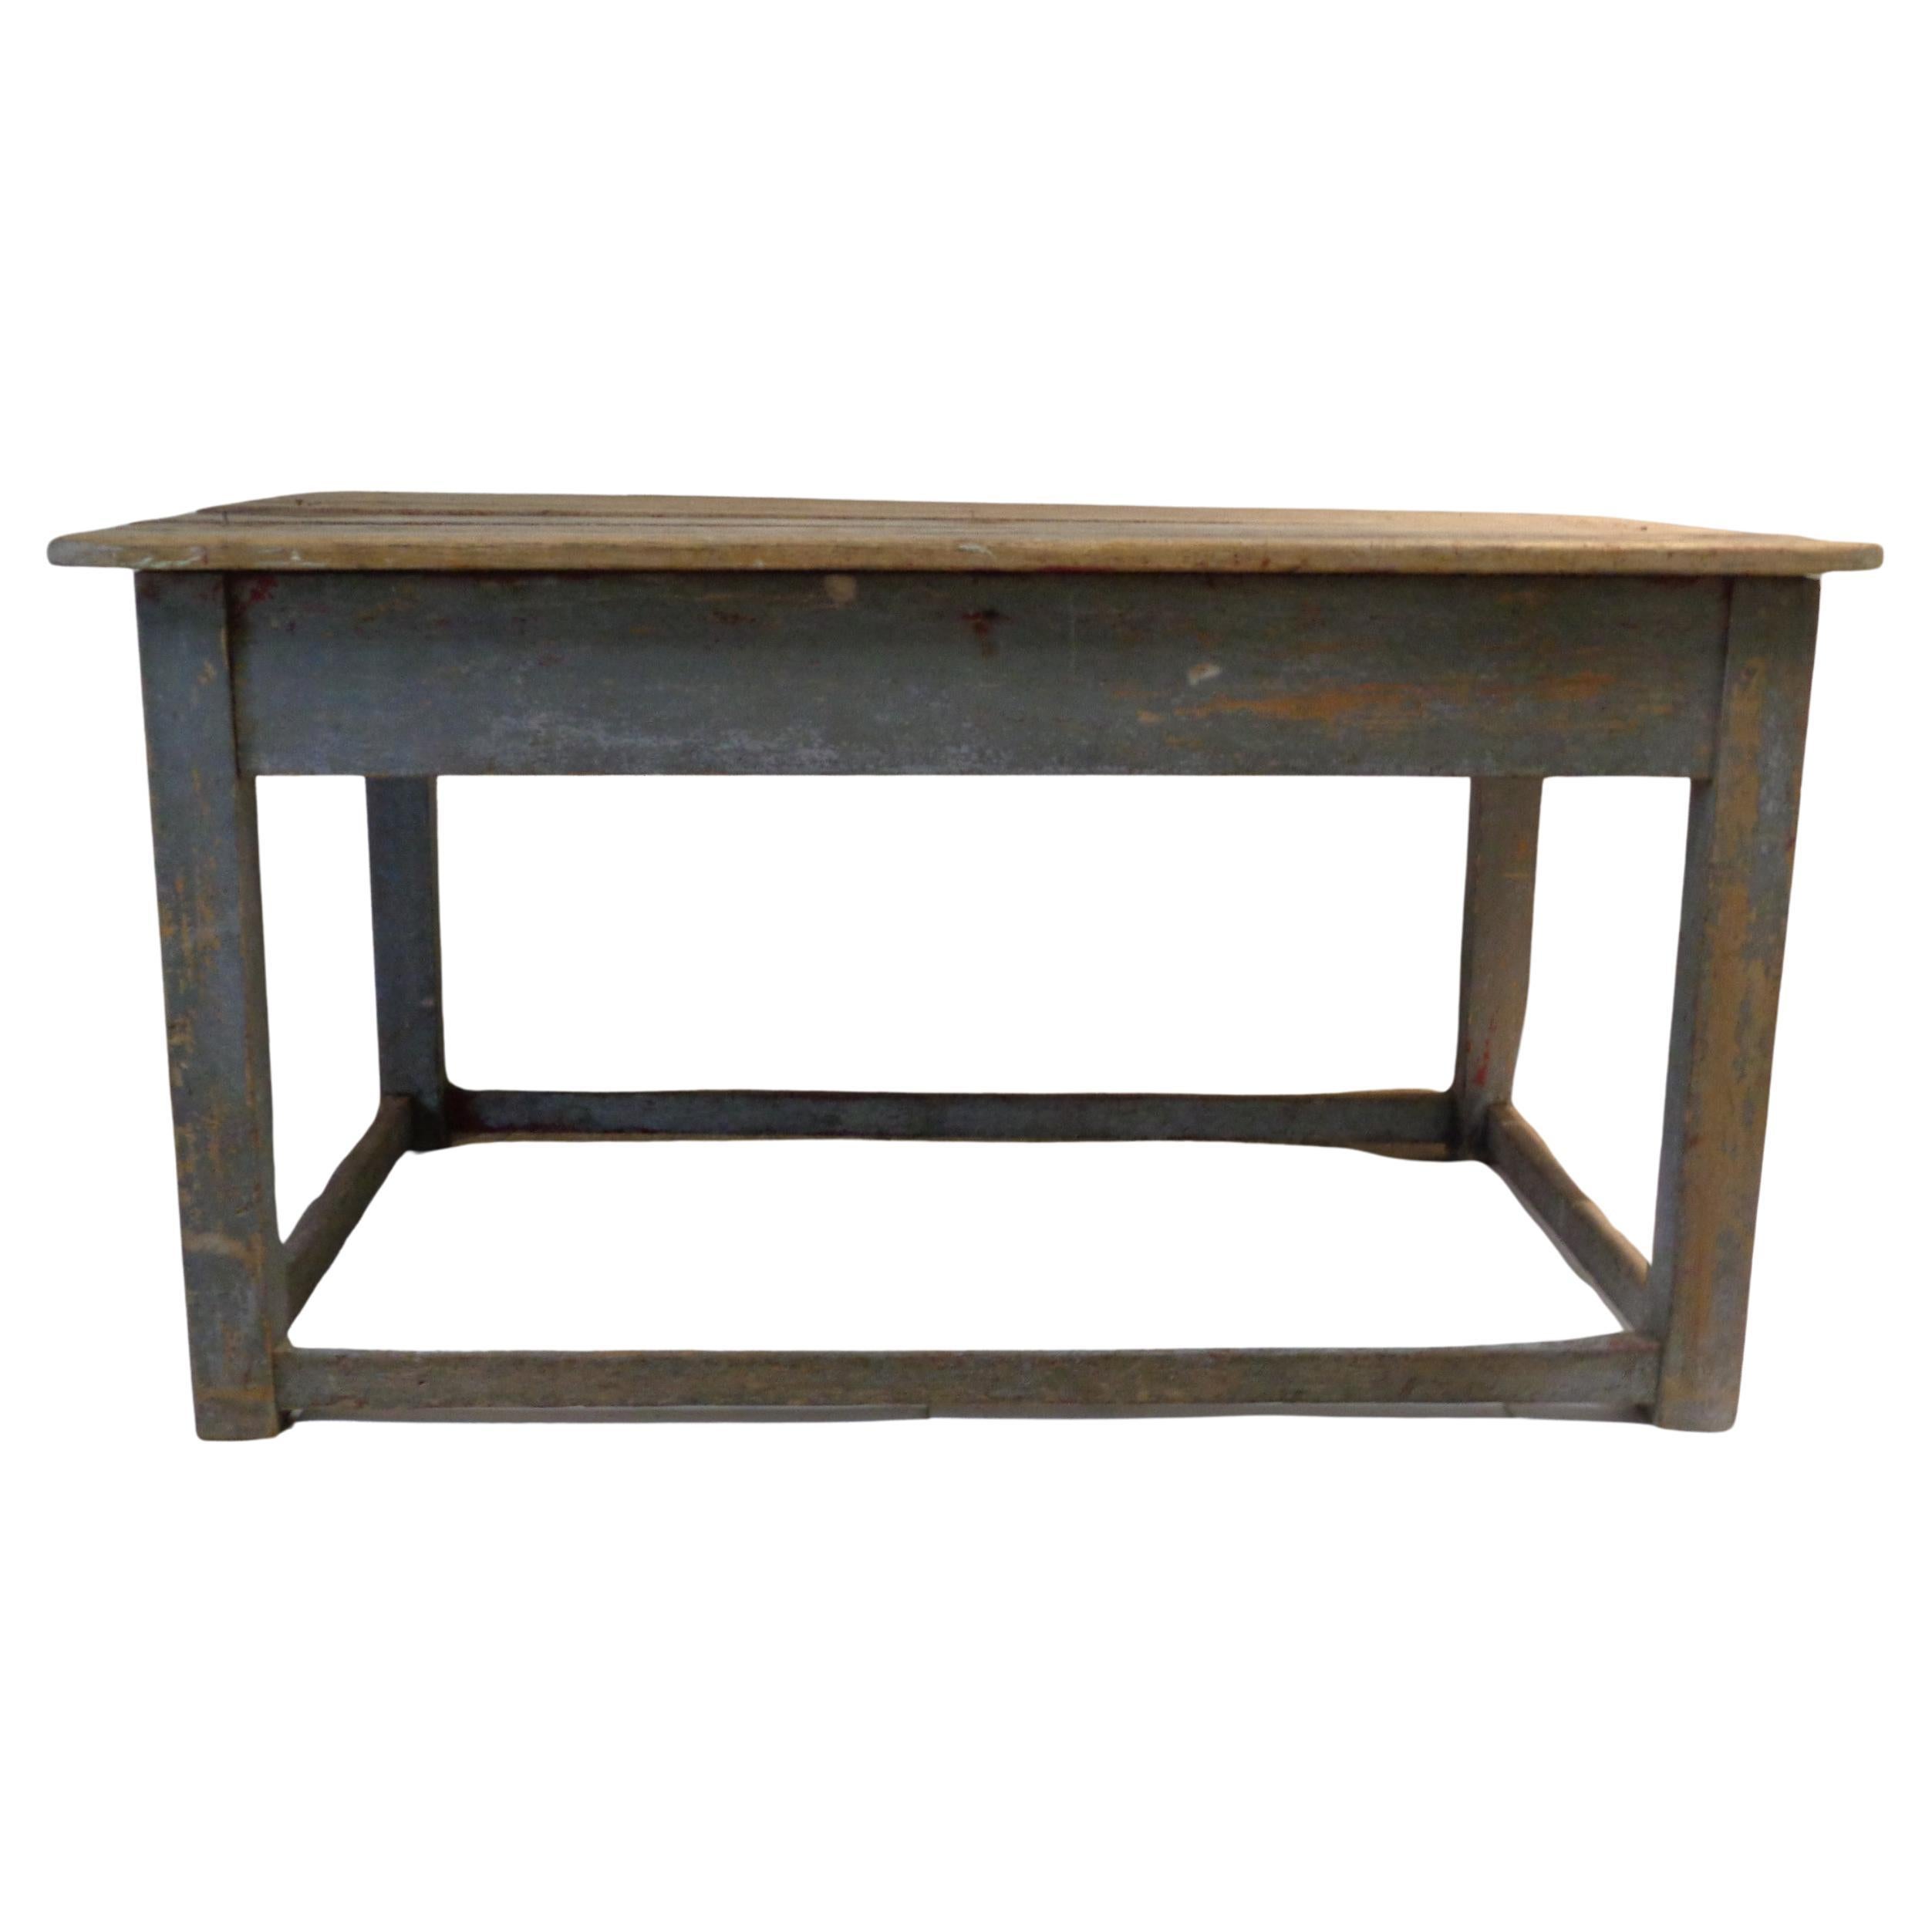 Early antique rustic country work table -  original nicely aged blue painted base with traces of later red paint and early pegged  mortised construction ( see img. 7 of peg ) The four legs joined by front and side stretchers at lower bottom.